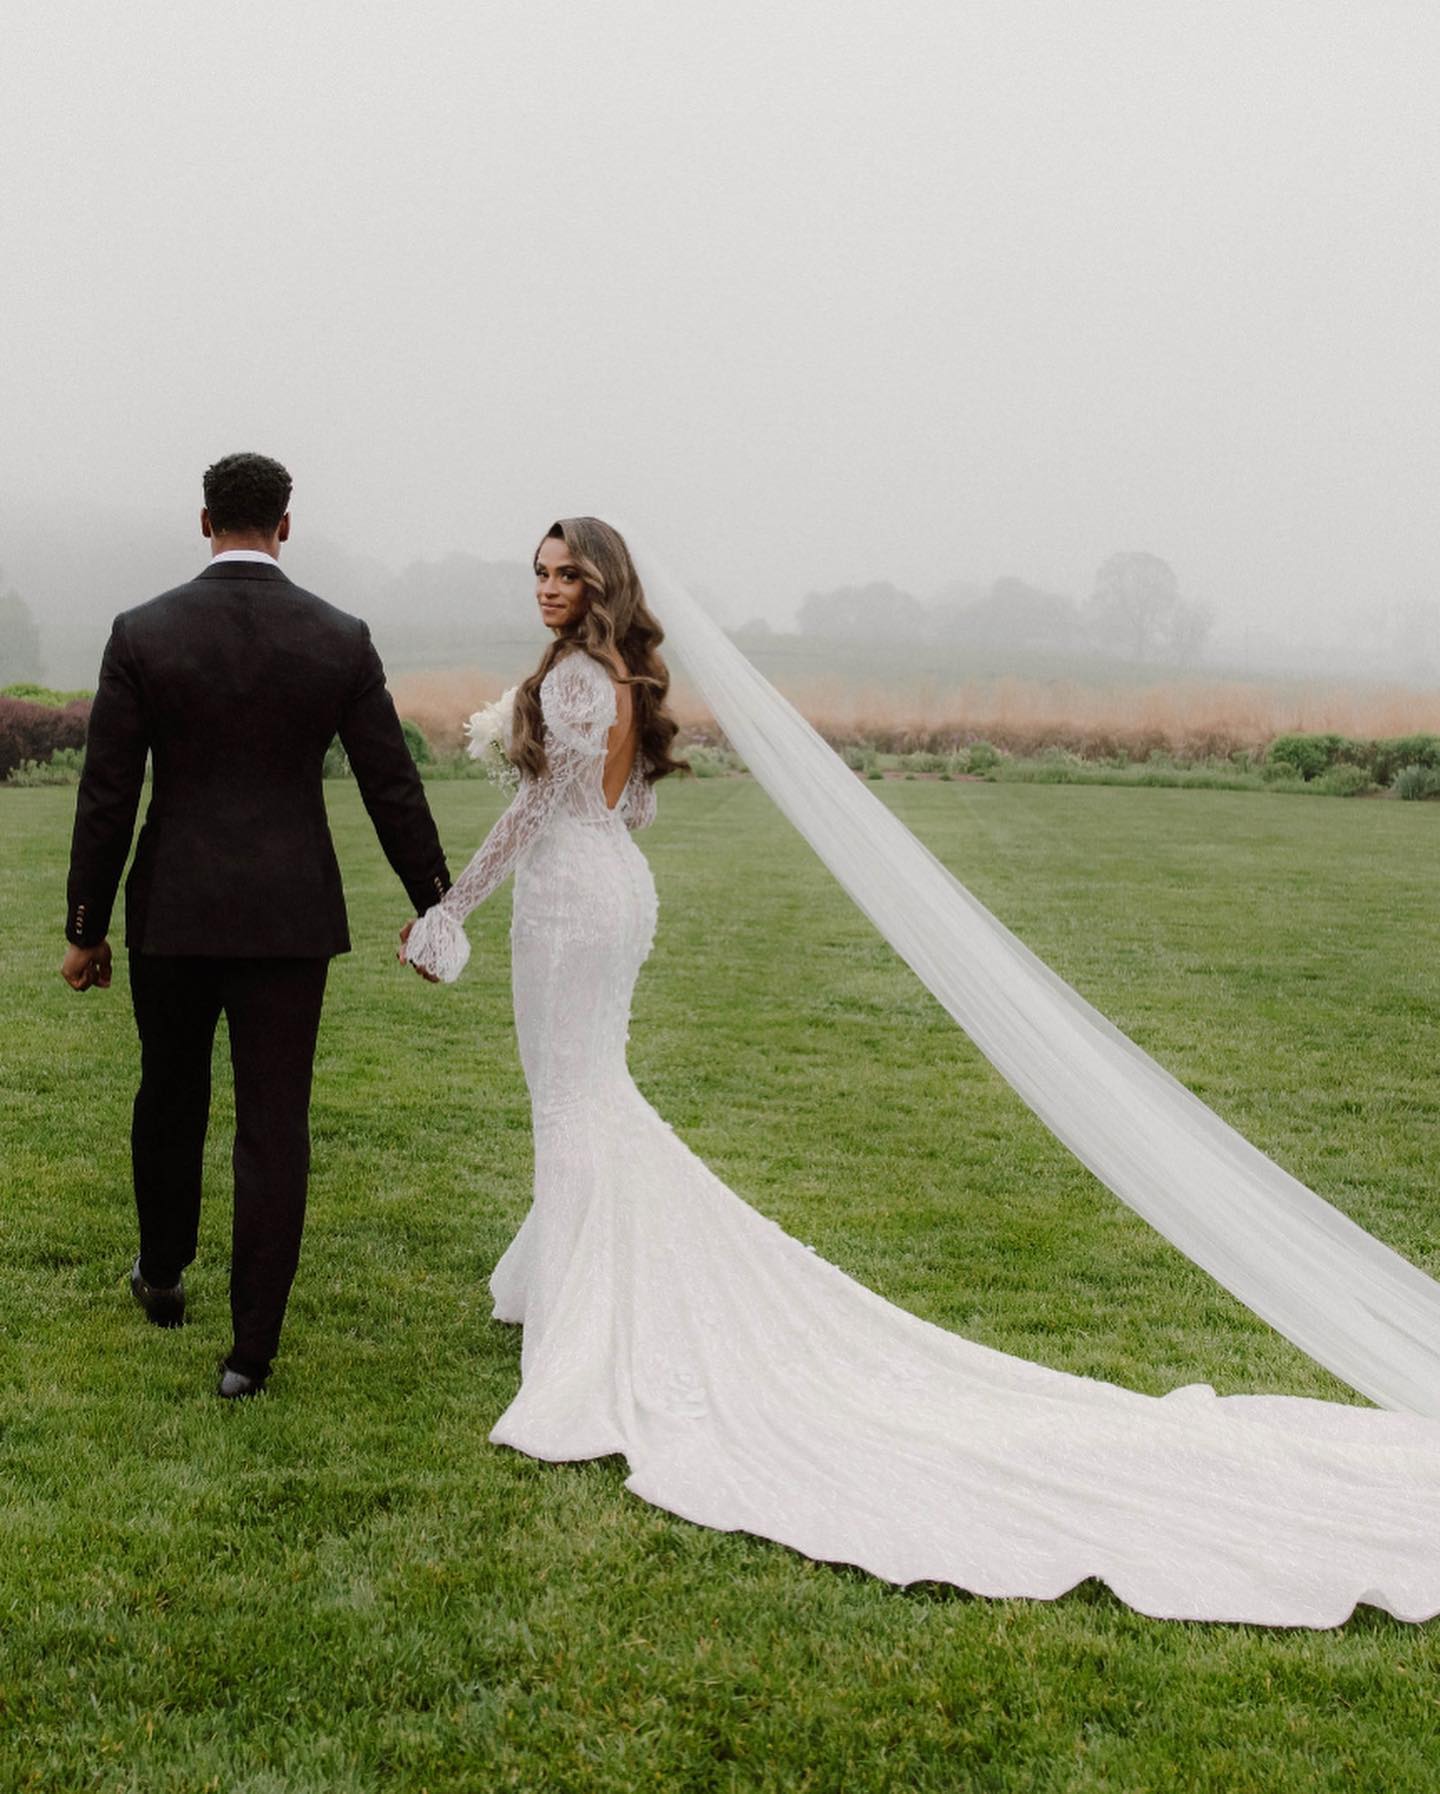 Sydney McLaughlin and Andre Levrone Jr. Wedding: Exclusive Photos